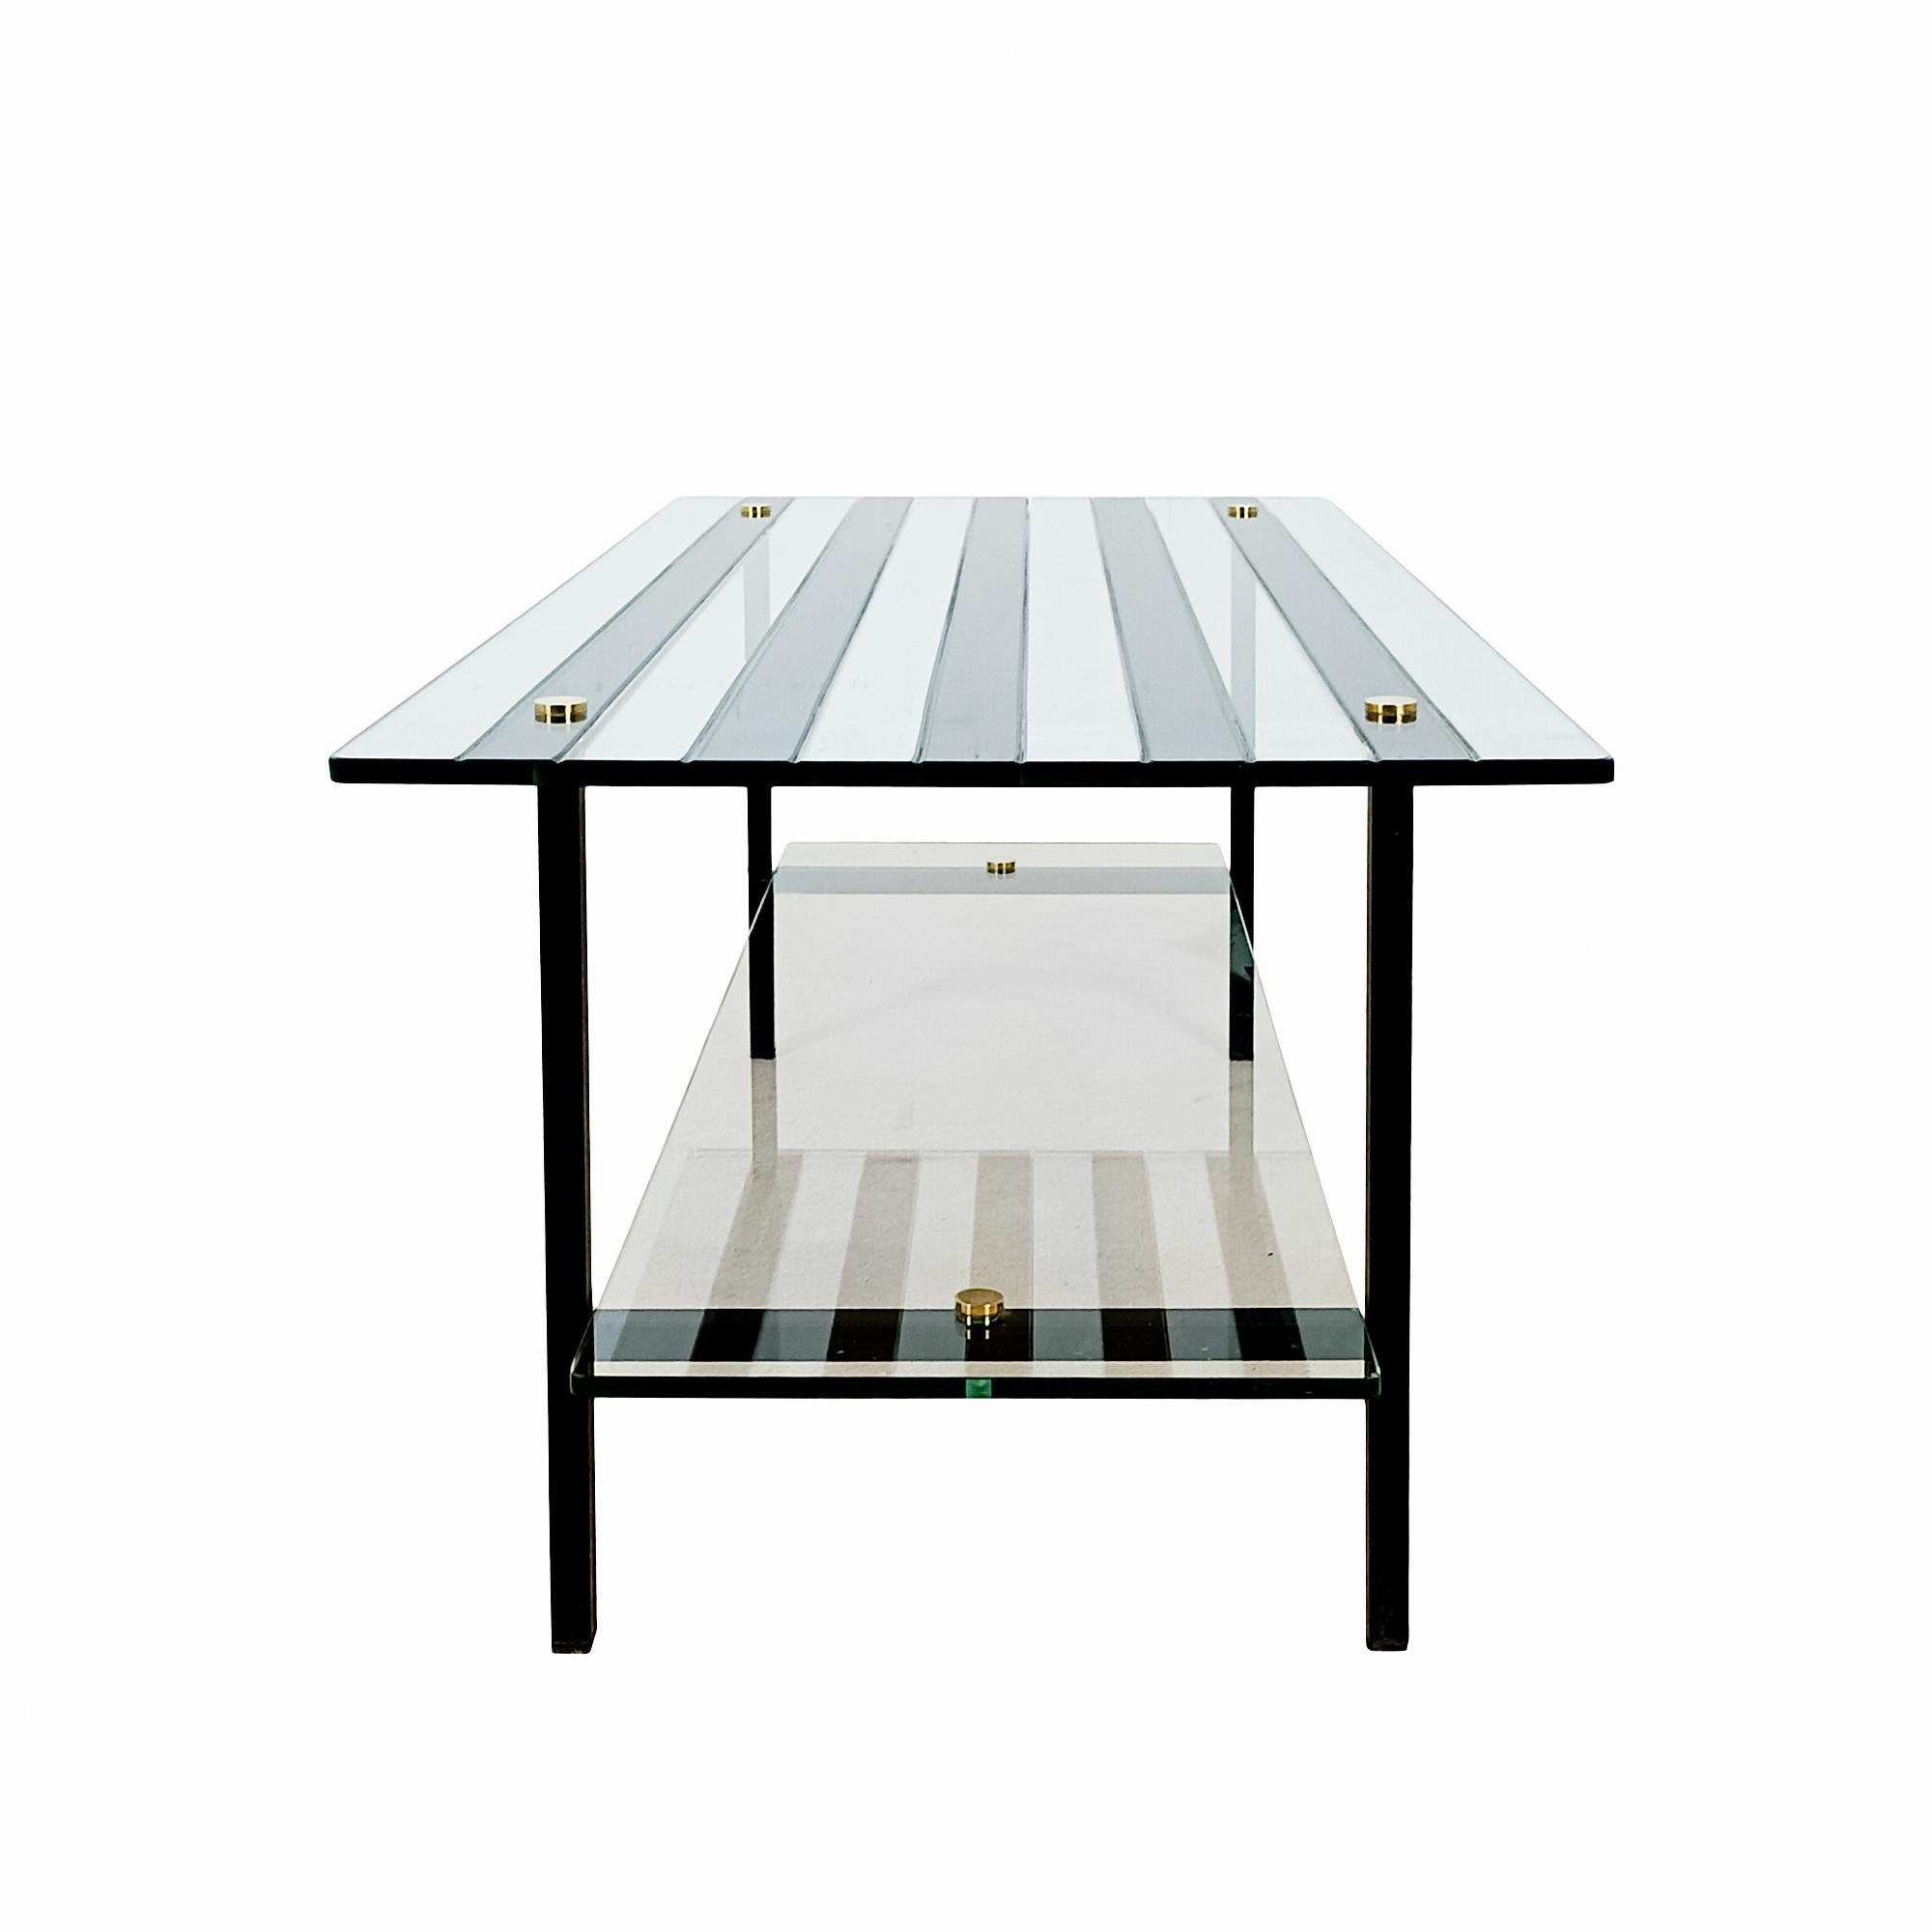 Polished Mid-Century Modern Coffee Table With Steel Structure and Mirrored Glass - France For Sale